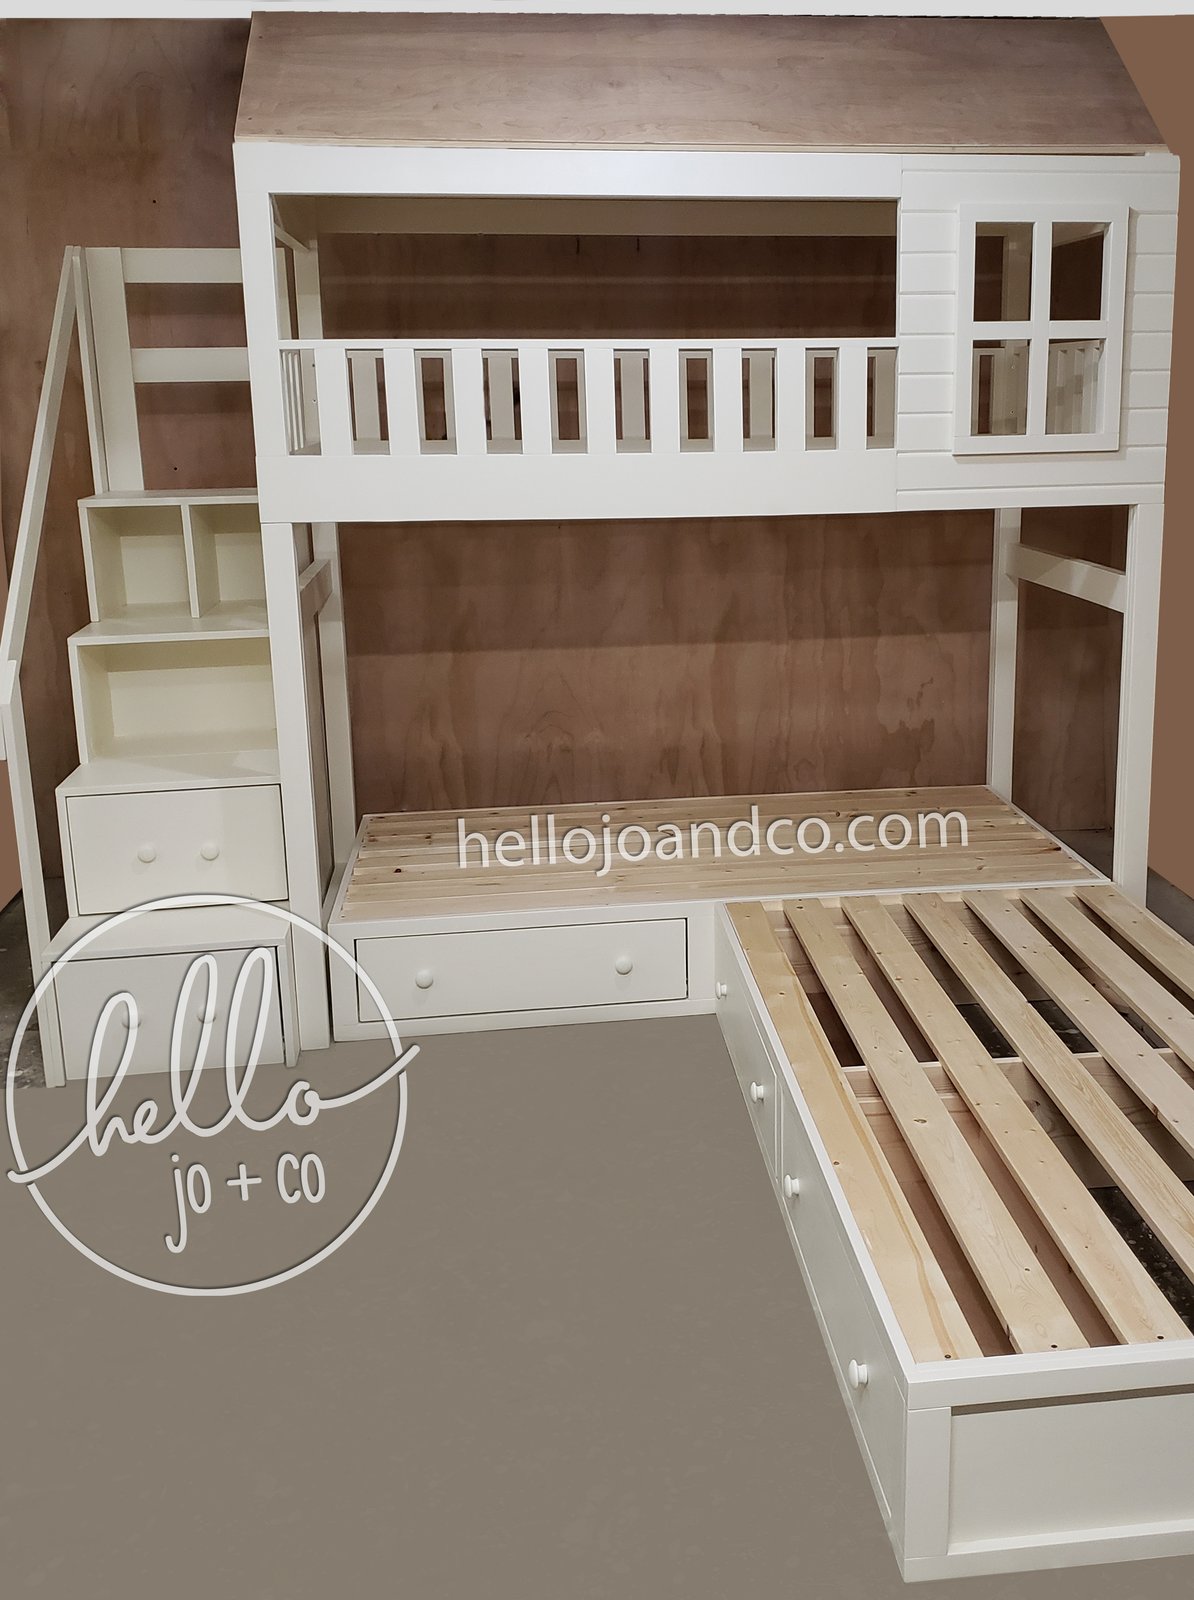 twin size loft bed with stairs